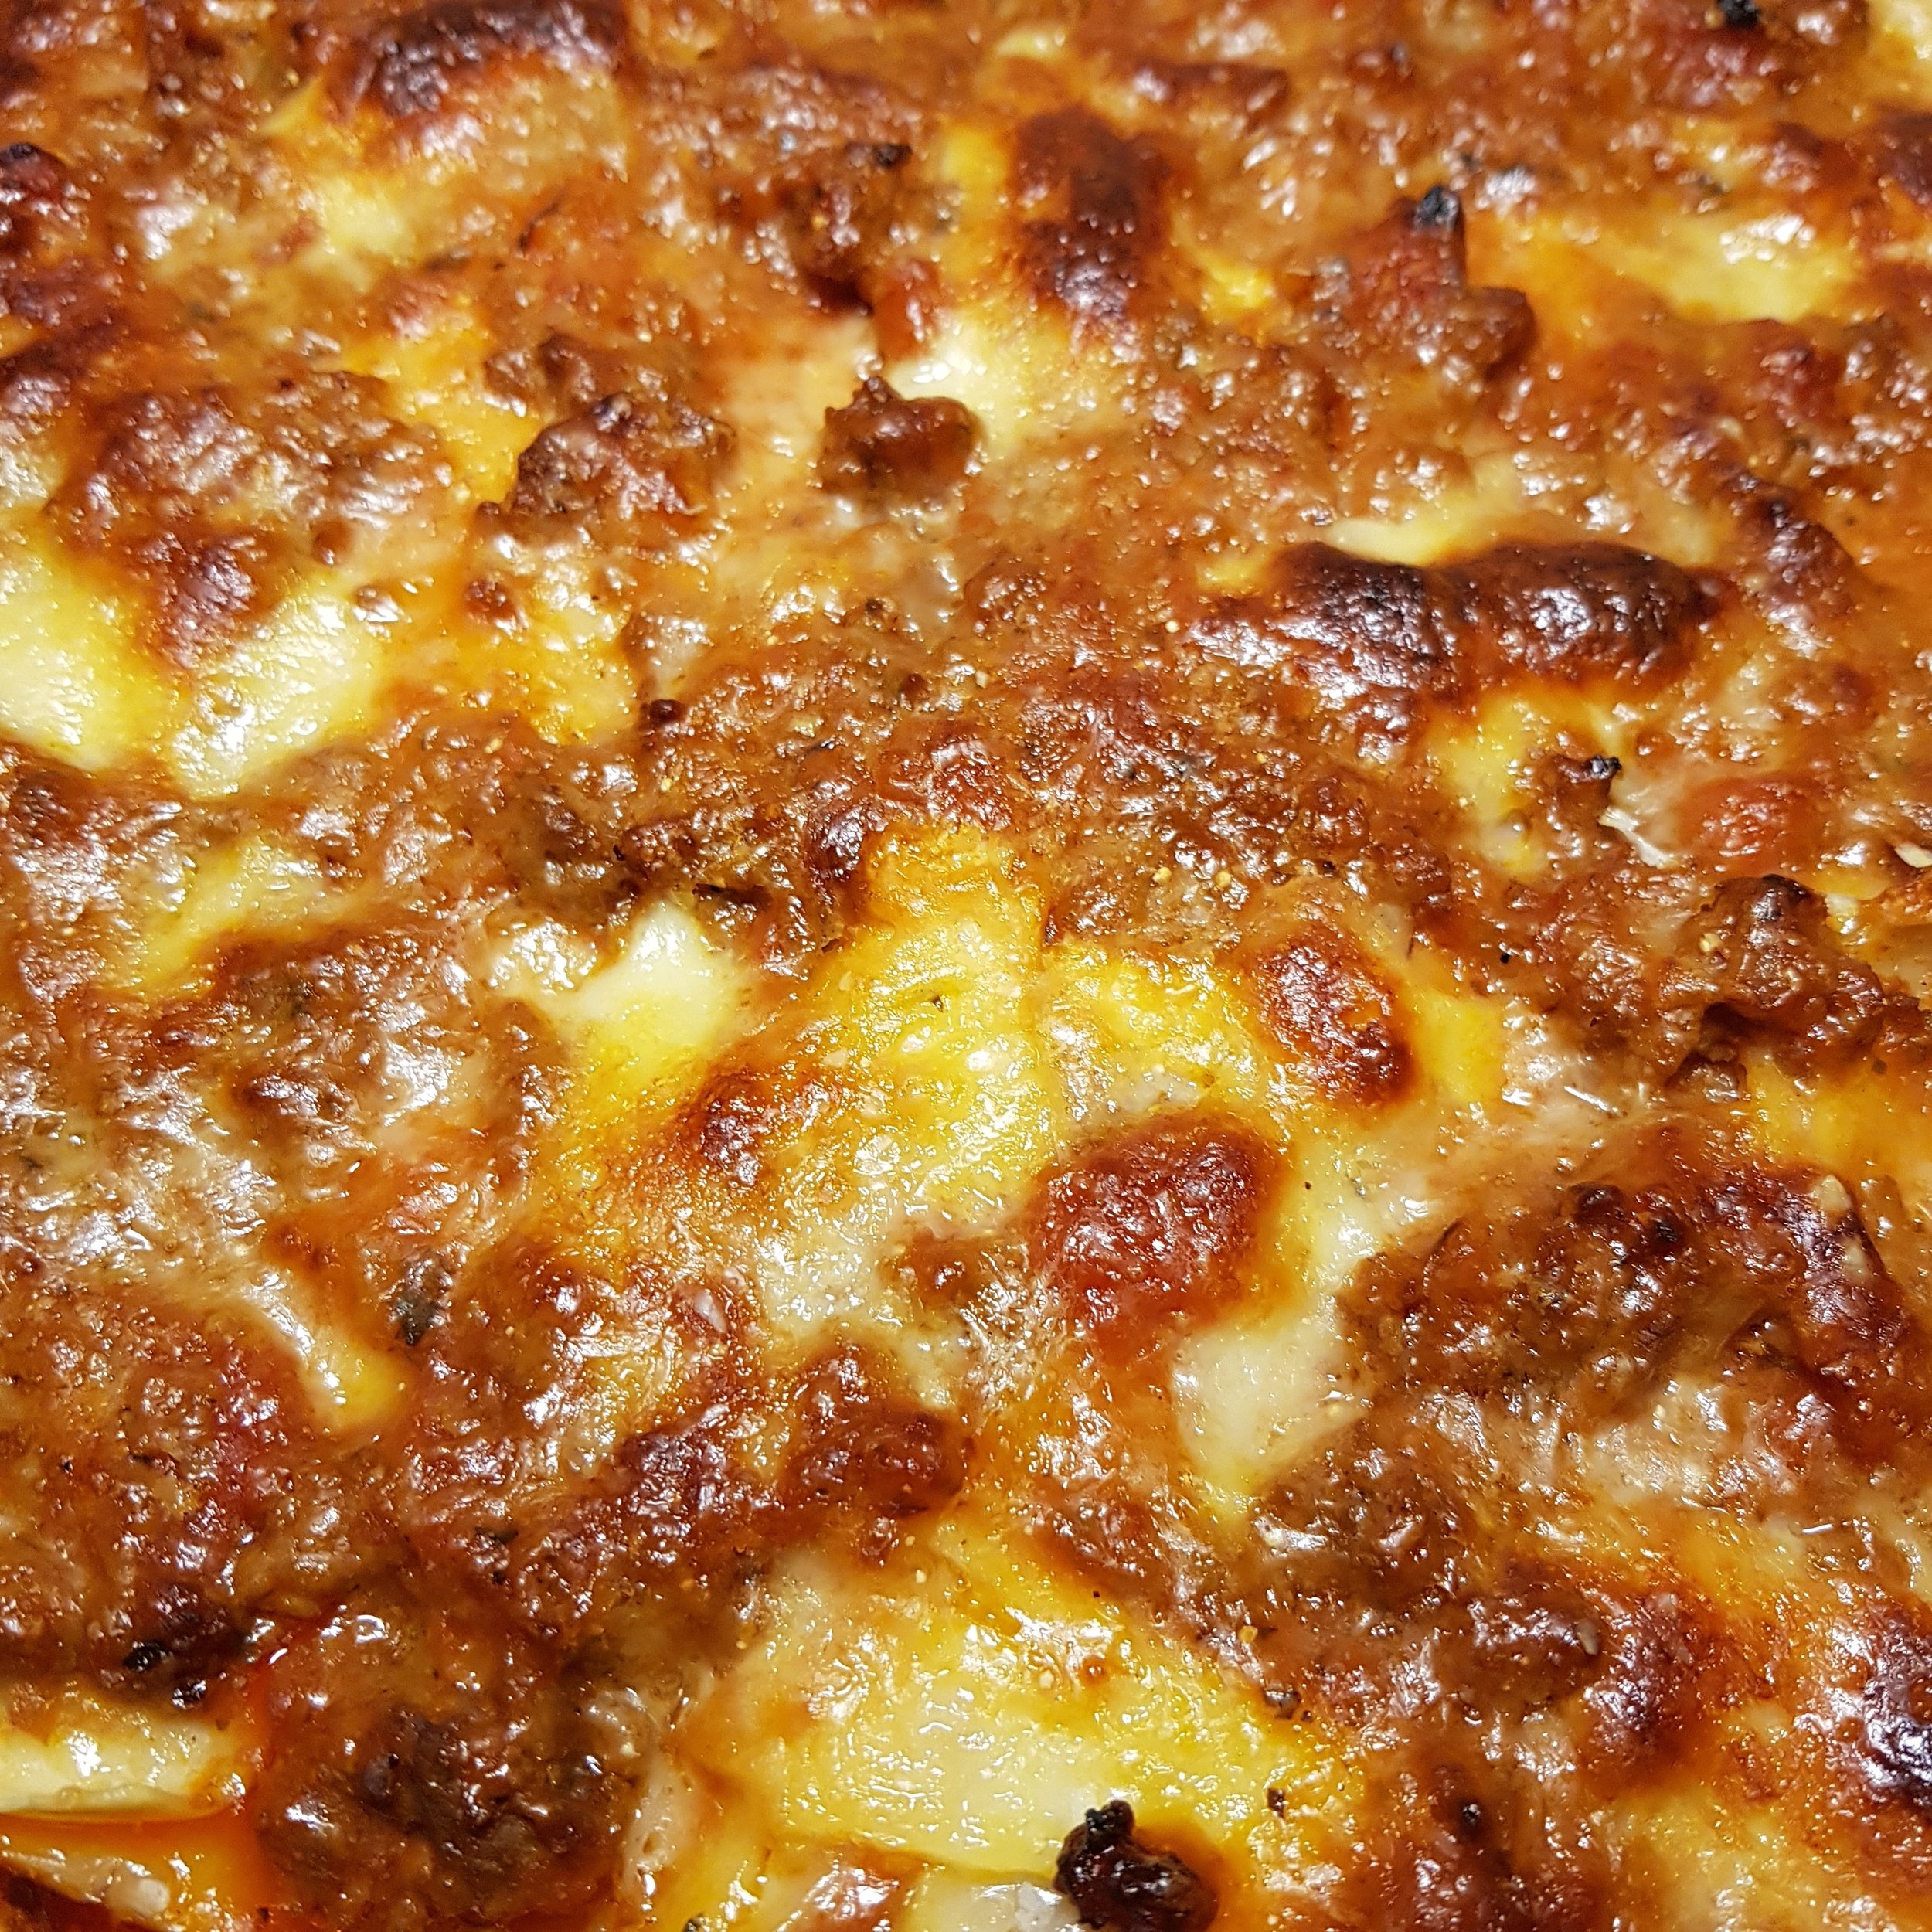 Day 3: January 3 - Lasagna for days!